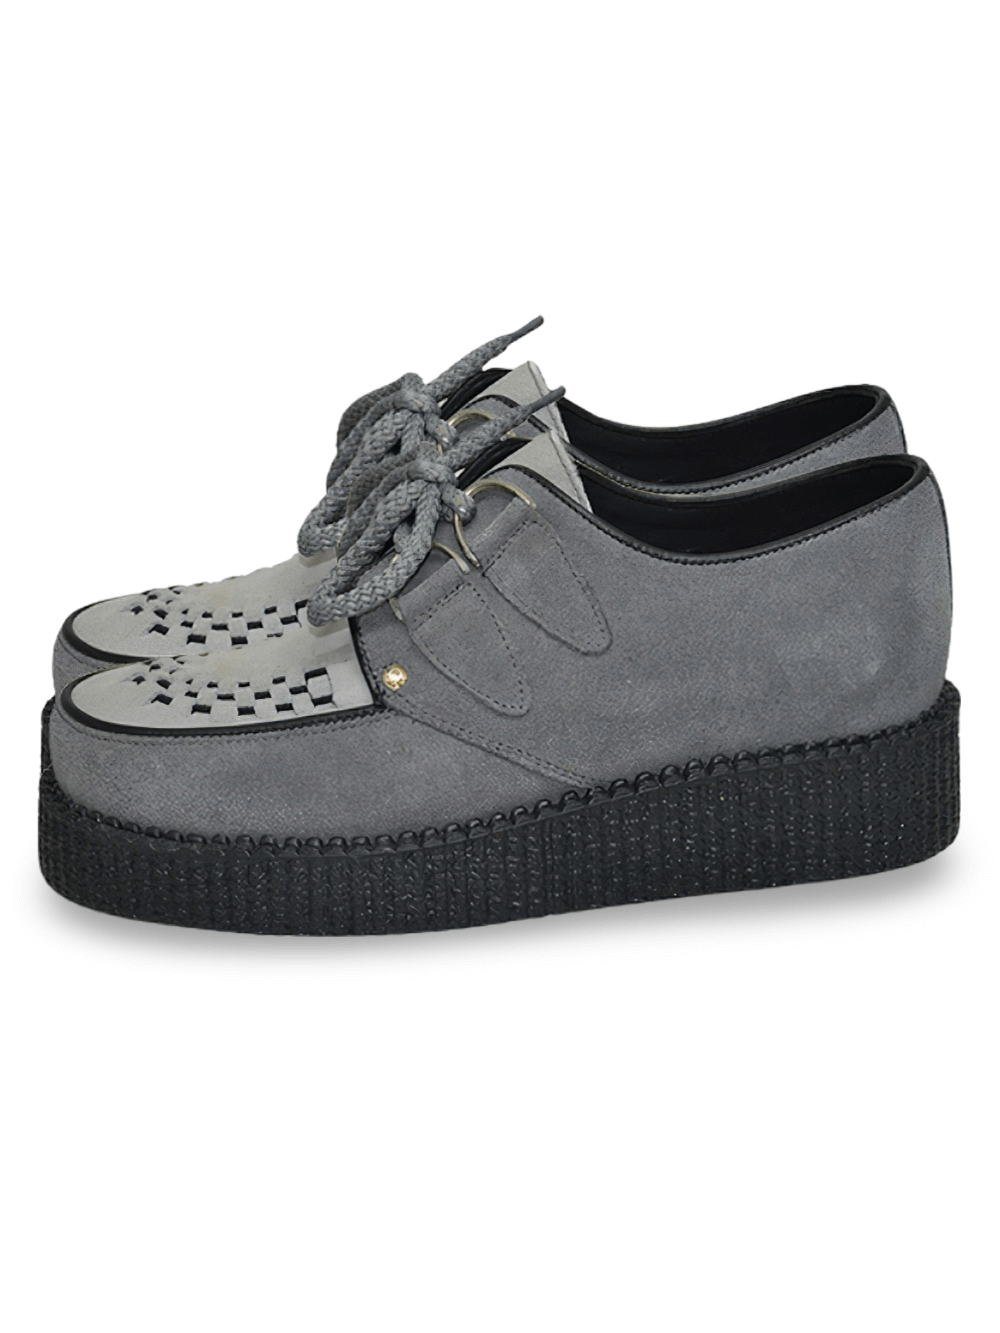 Gray Suede Creepers with Rubber Sole And Lace-Up